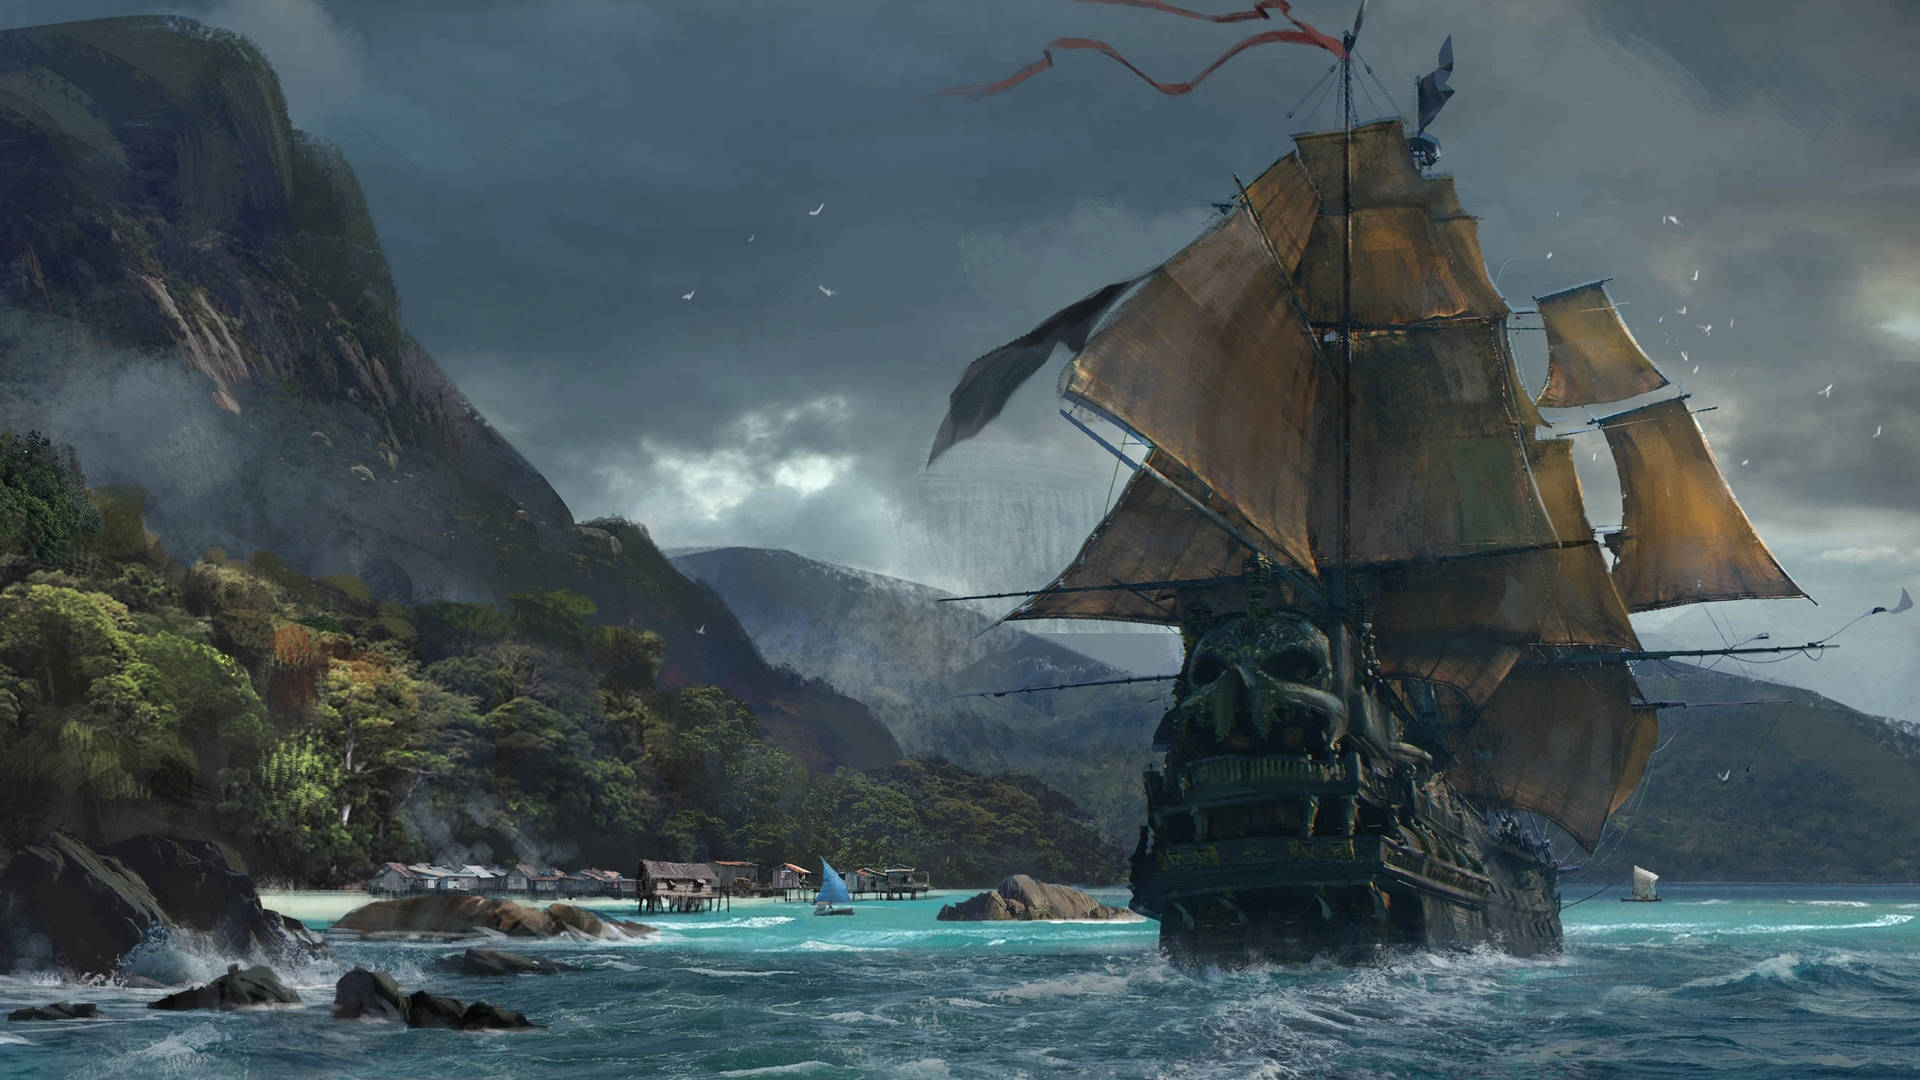 A ship sails in a stormy sea, a small village sits on a rocky shore in the distance. - Pirate